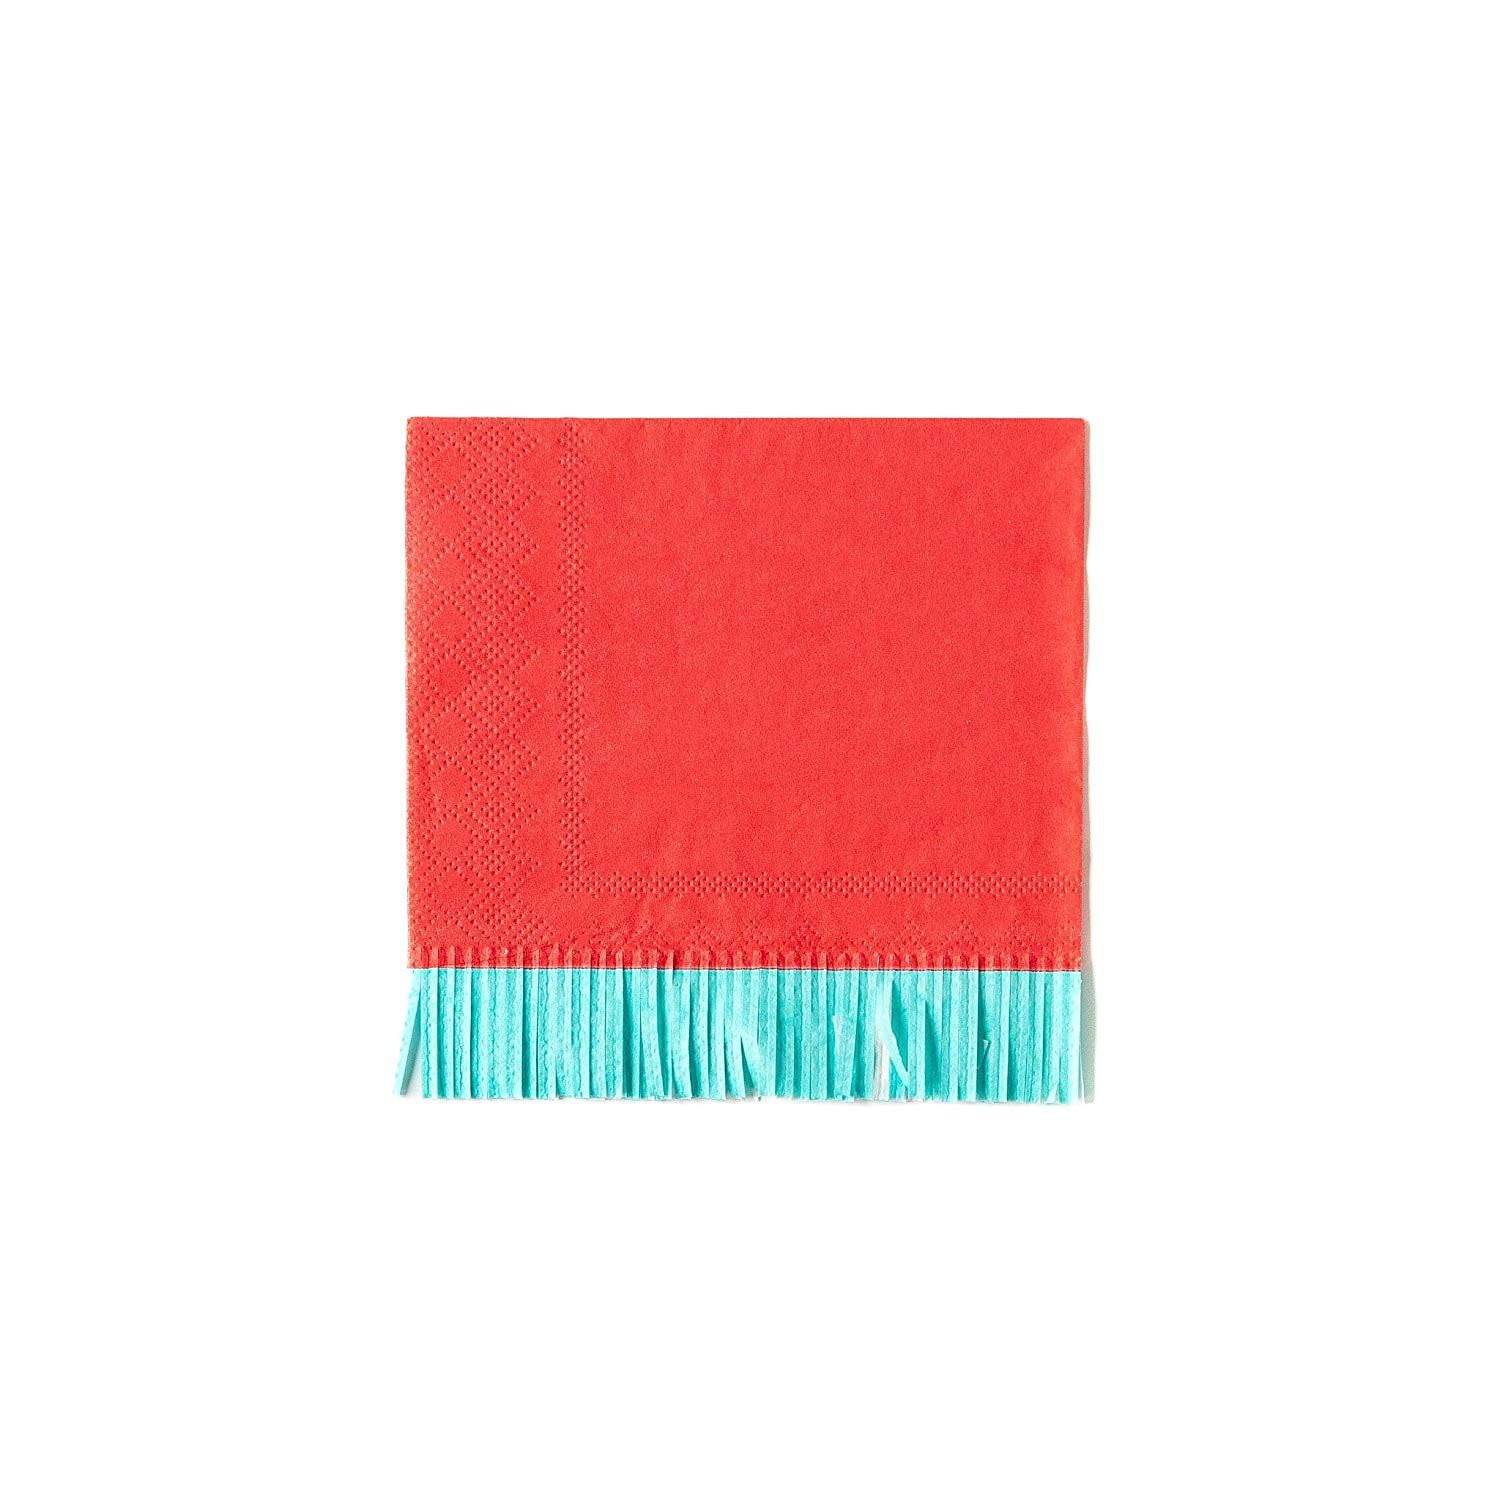 Hip Hip Hooray Fringed Beverage Napkins 24ct | The Party Darling